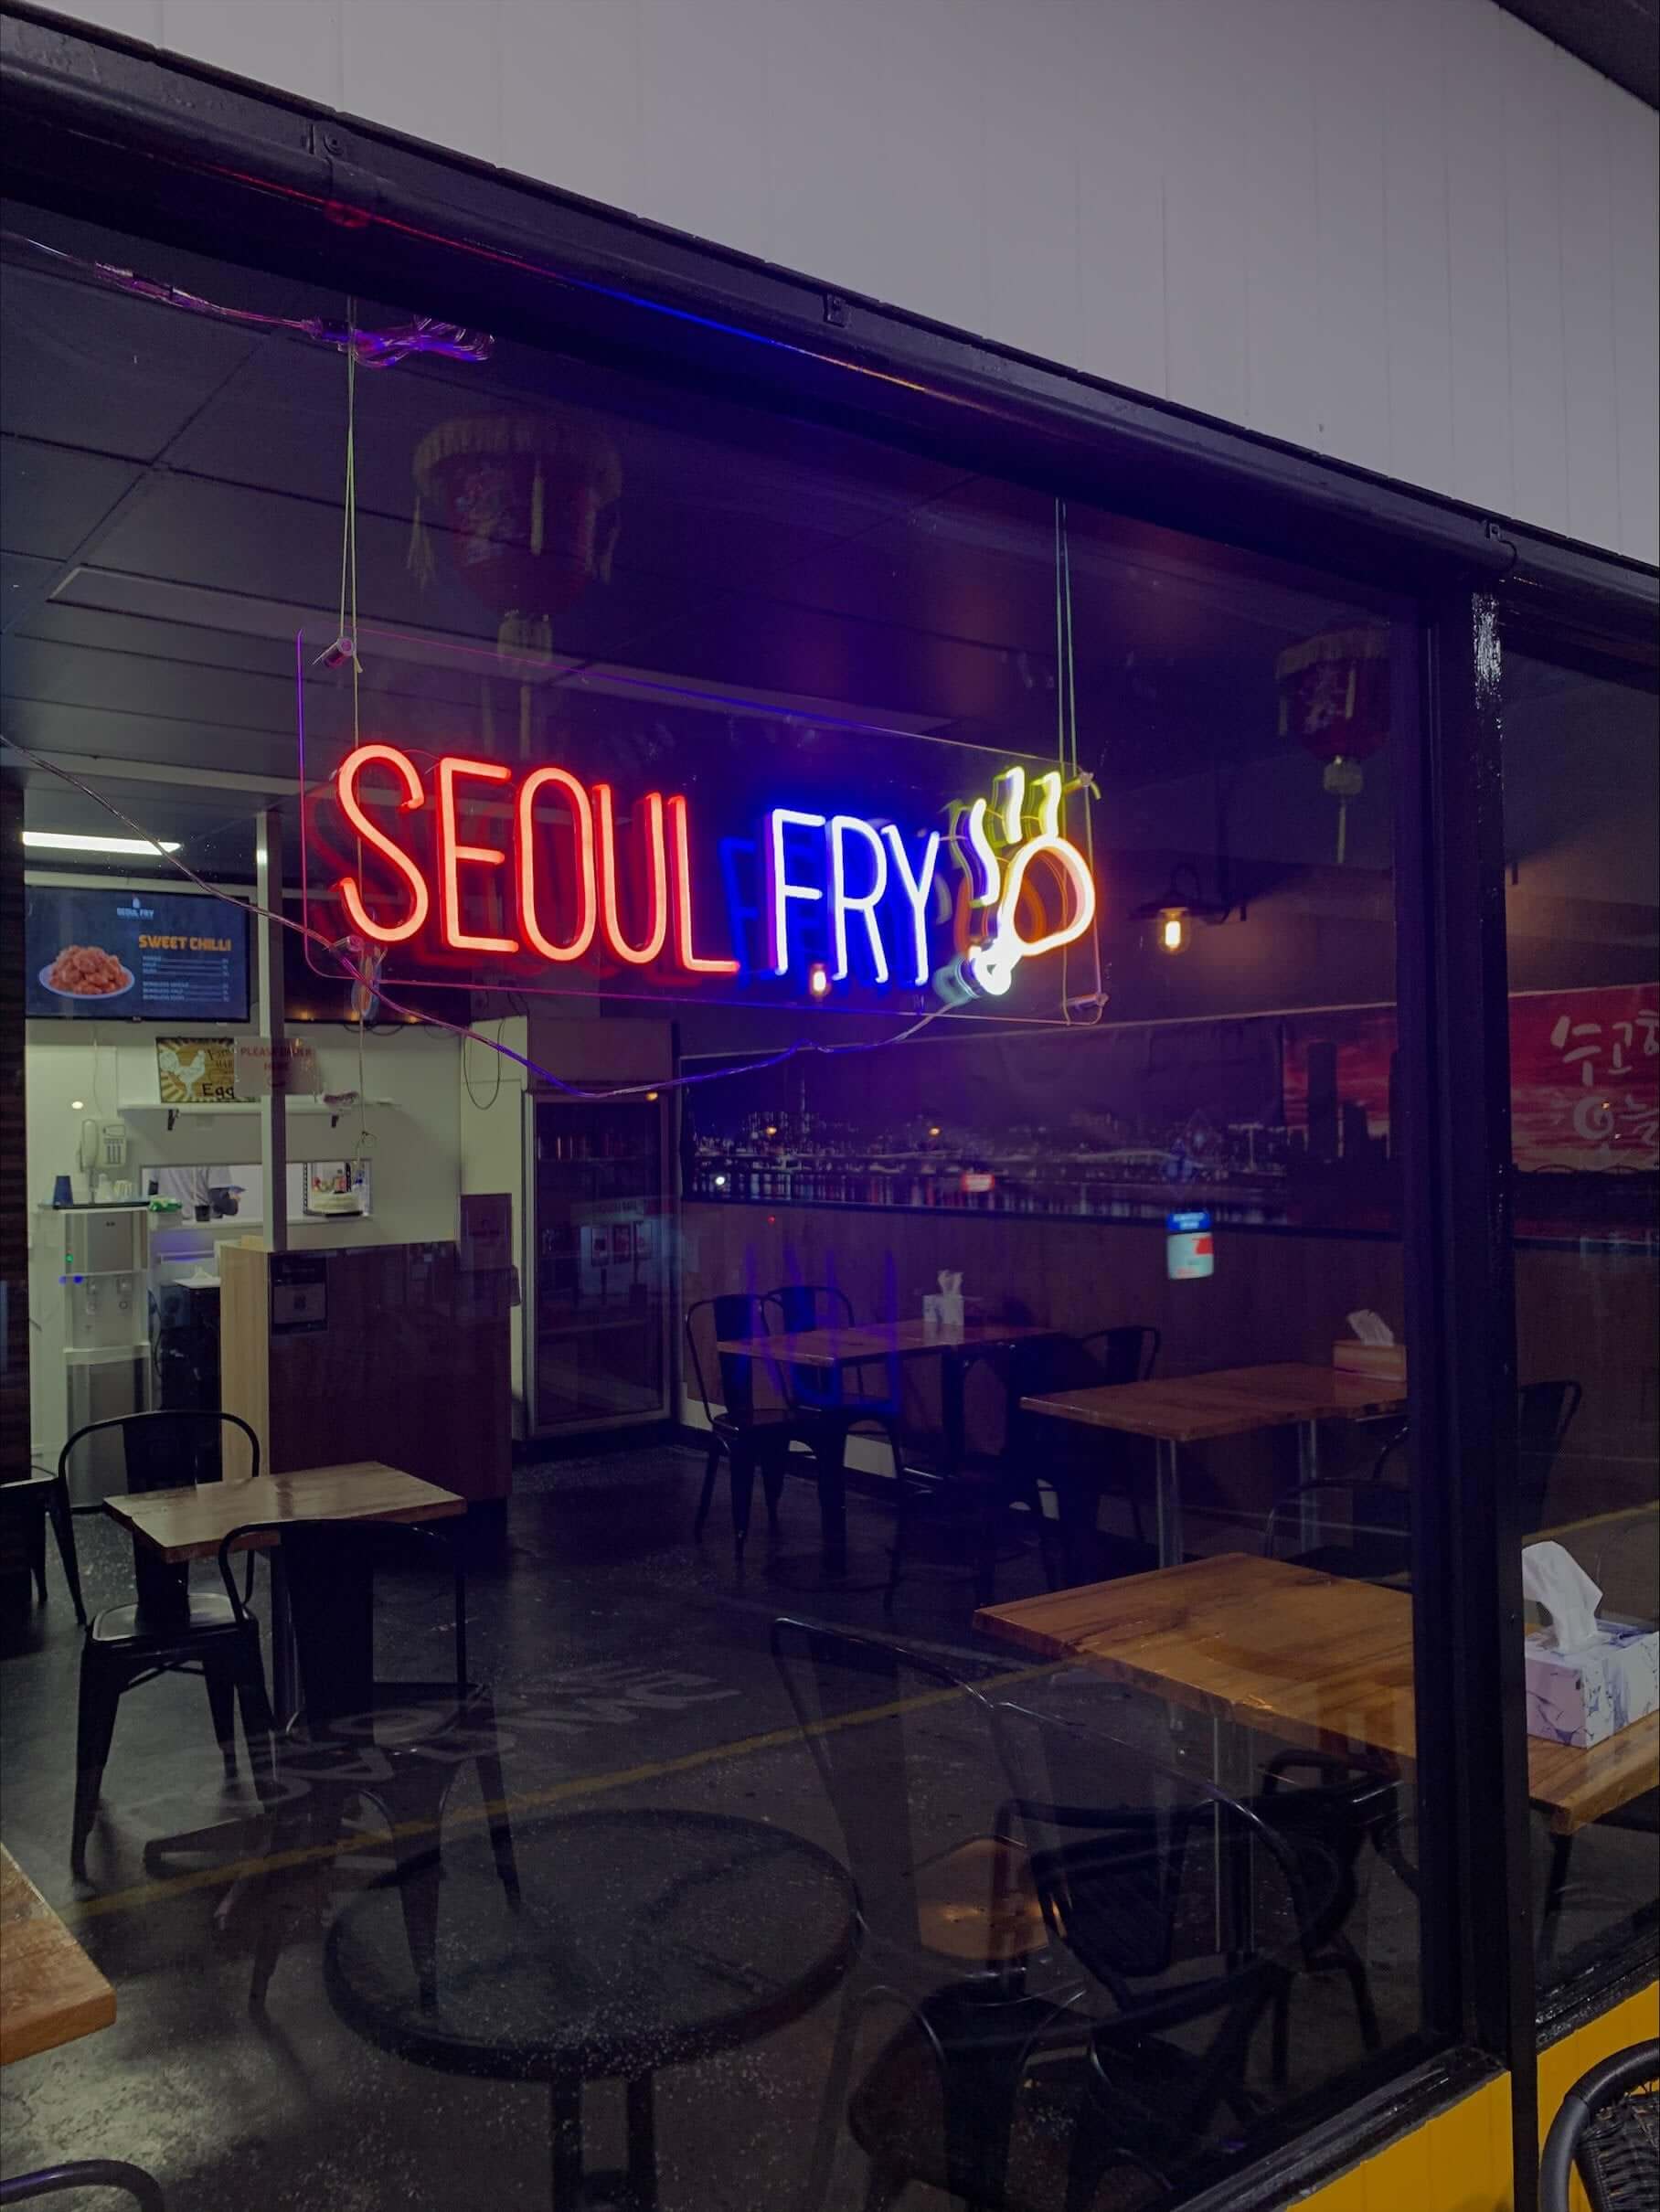 Red Blue Yellow Custom Neon Sign Made For A Korean Restaurant in Perth